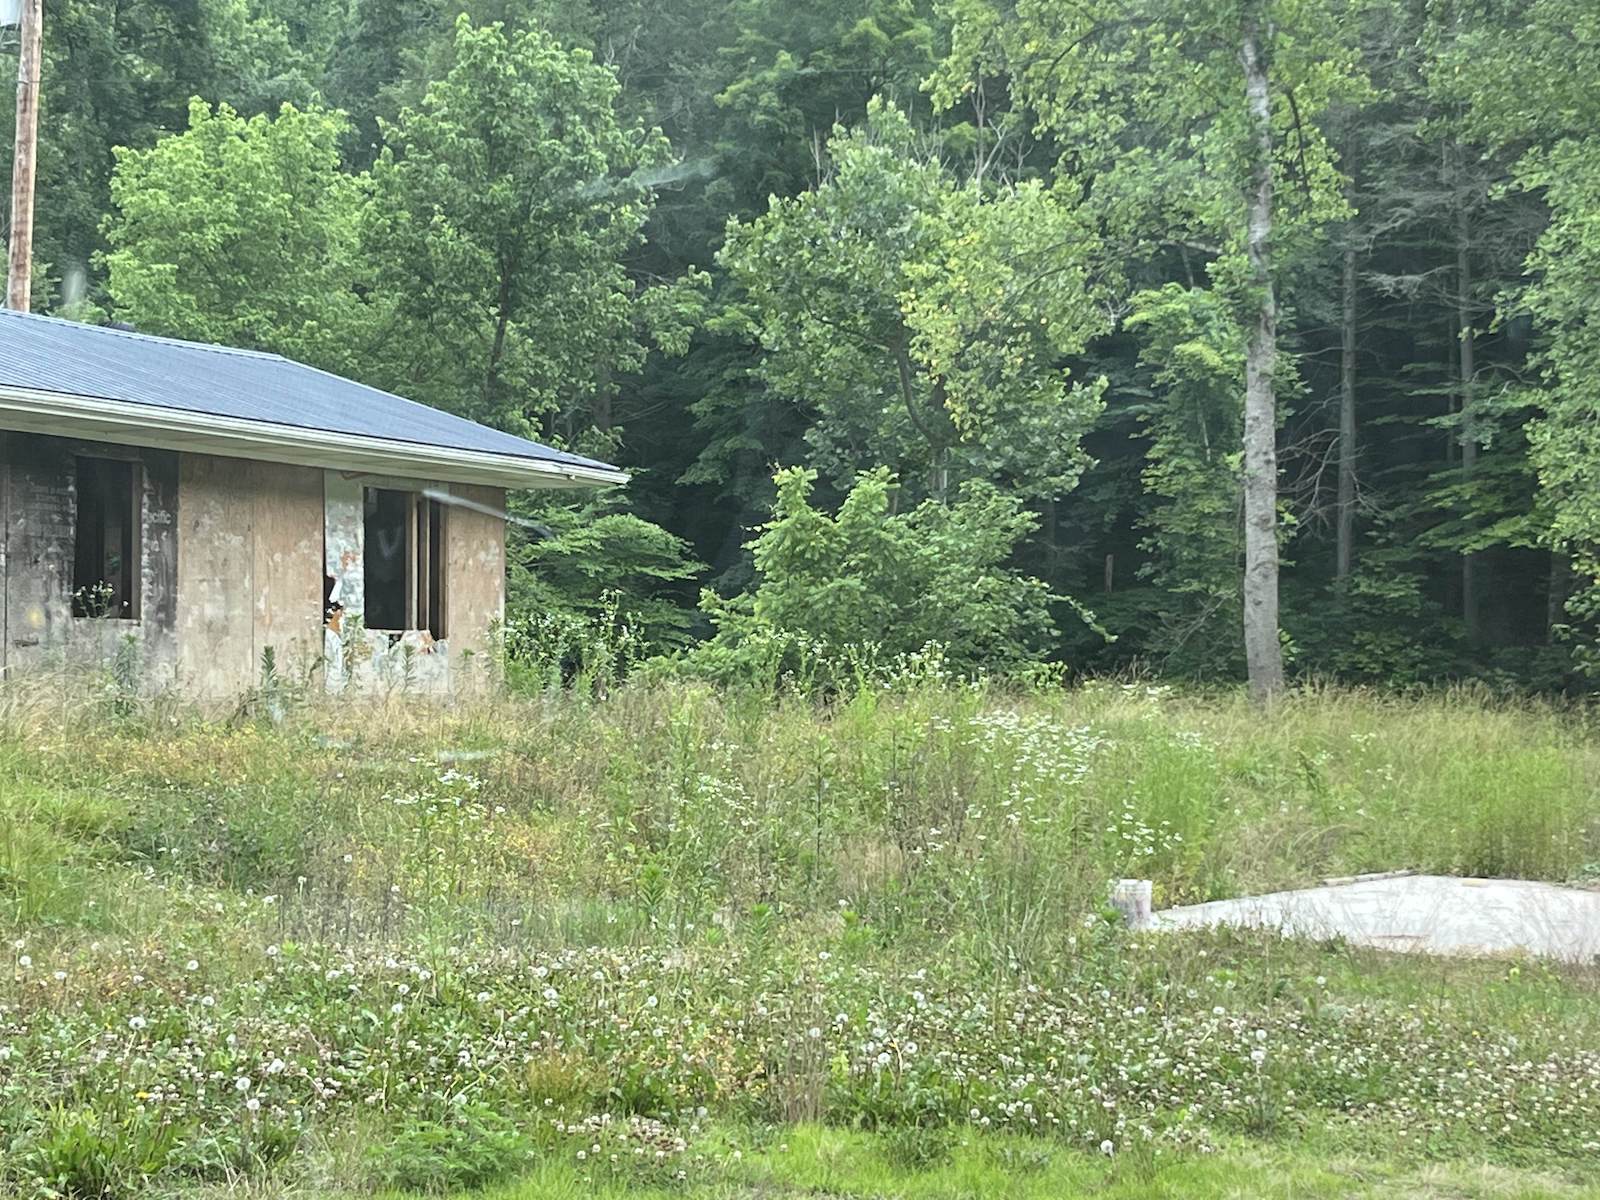 A flood-damaged building sits vacant in Lost Creek, Kentucky